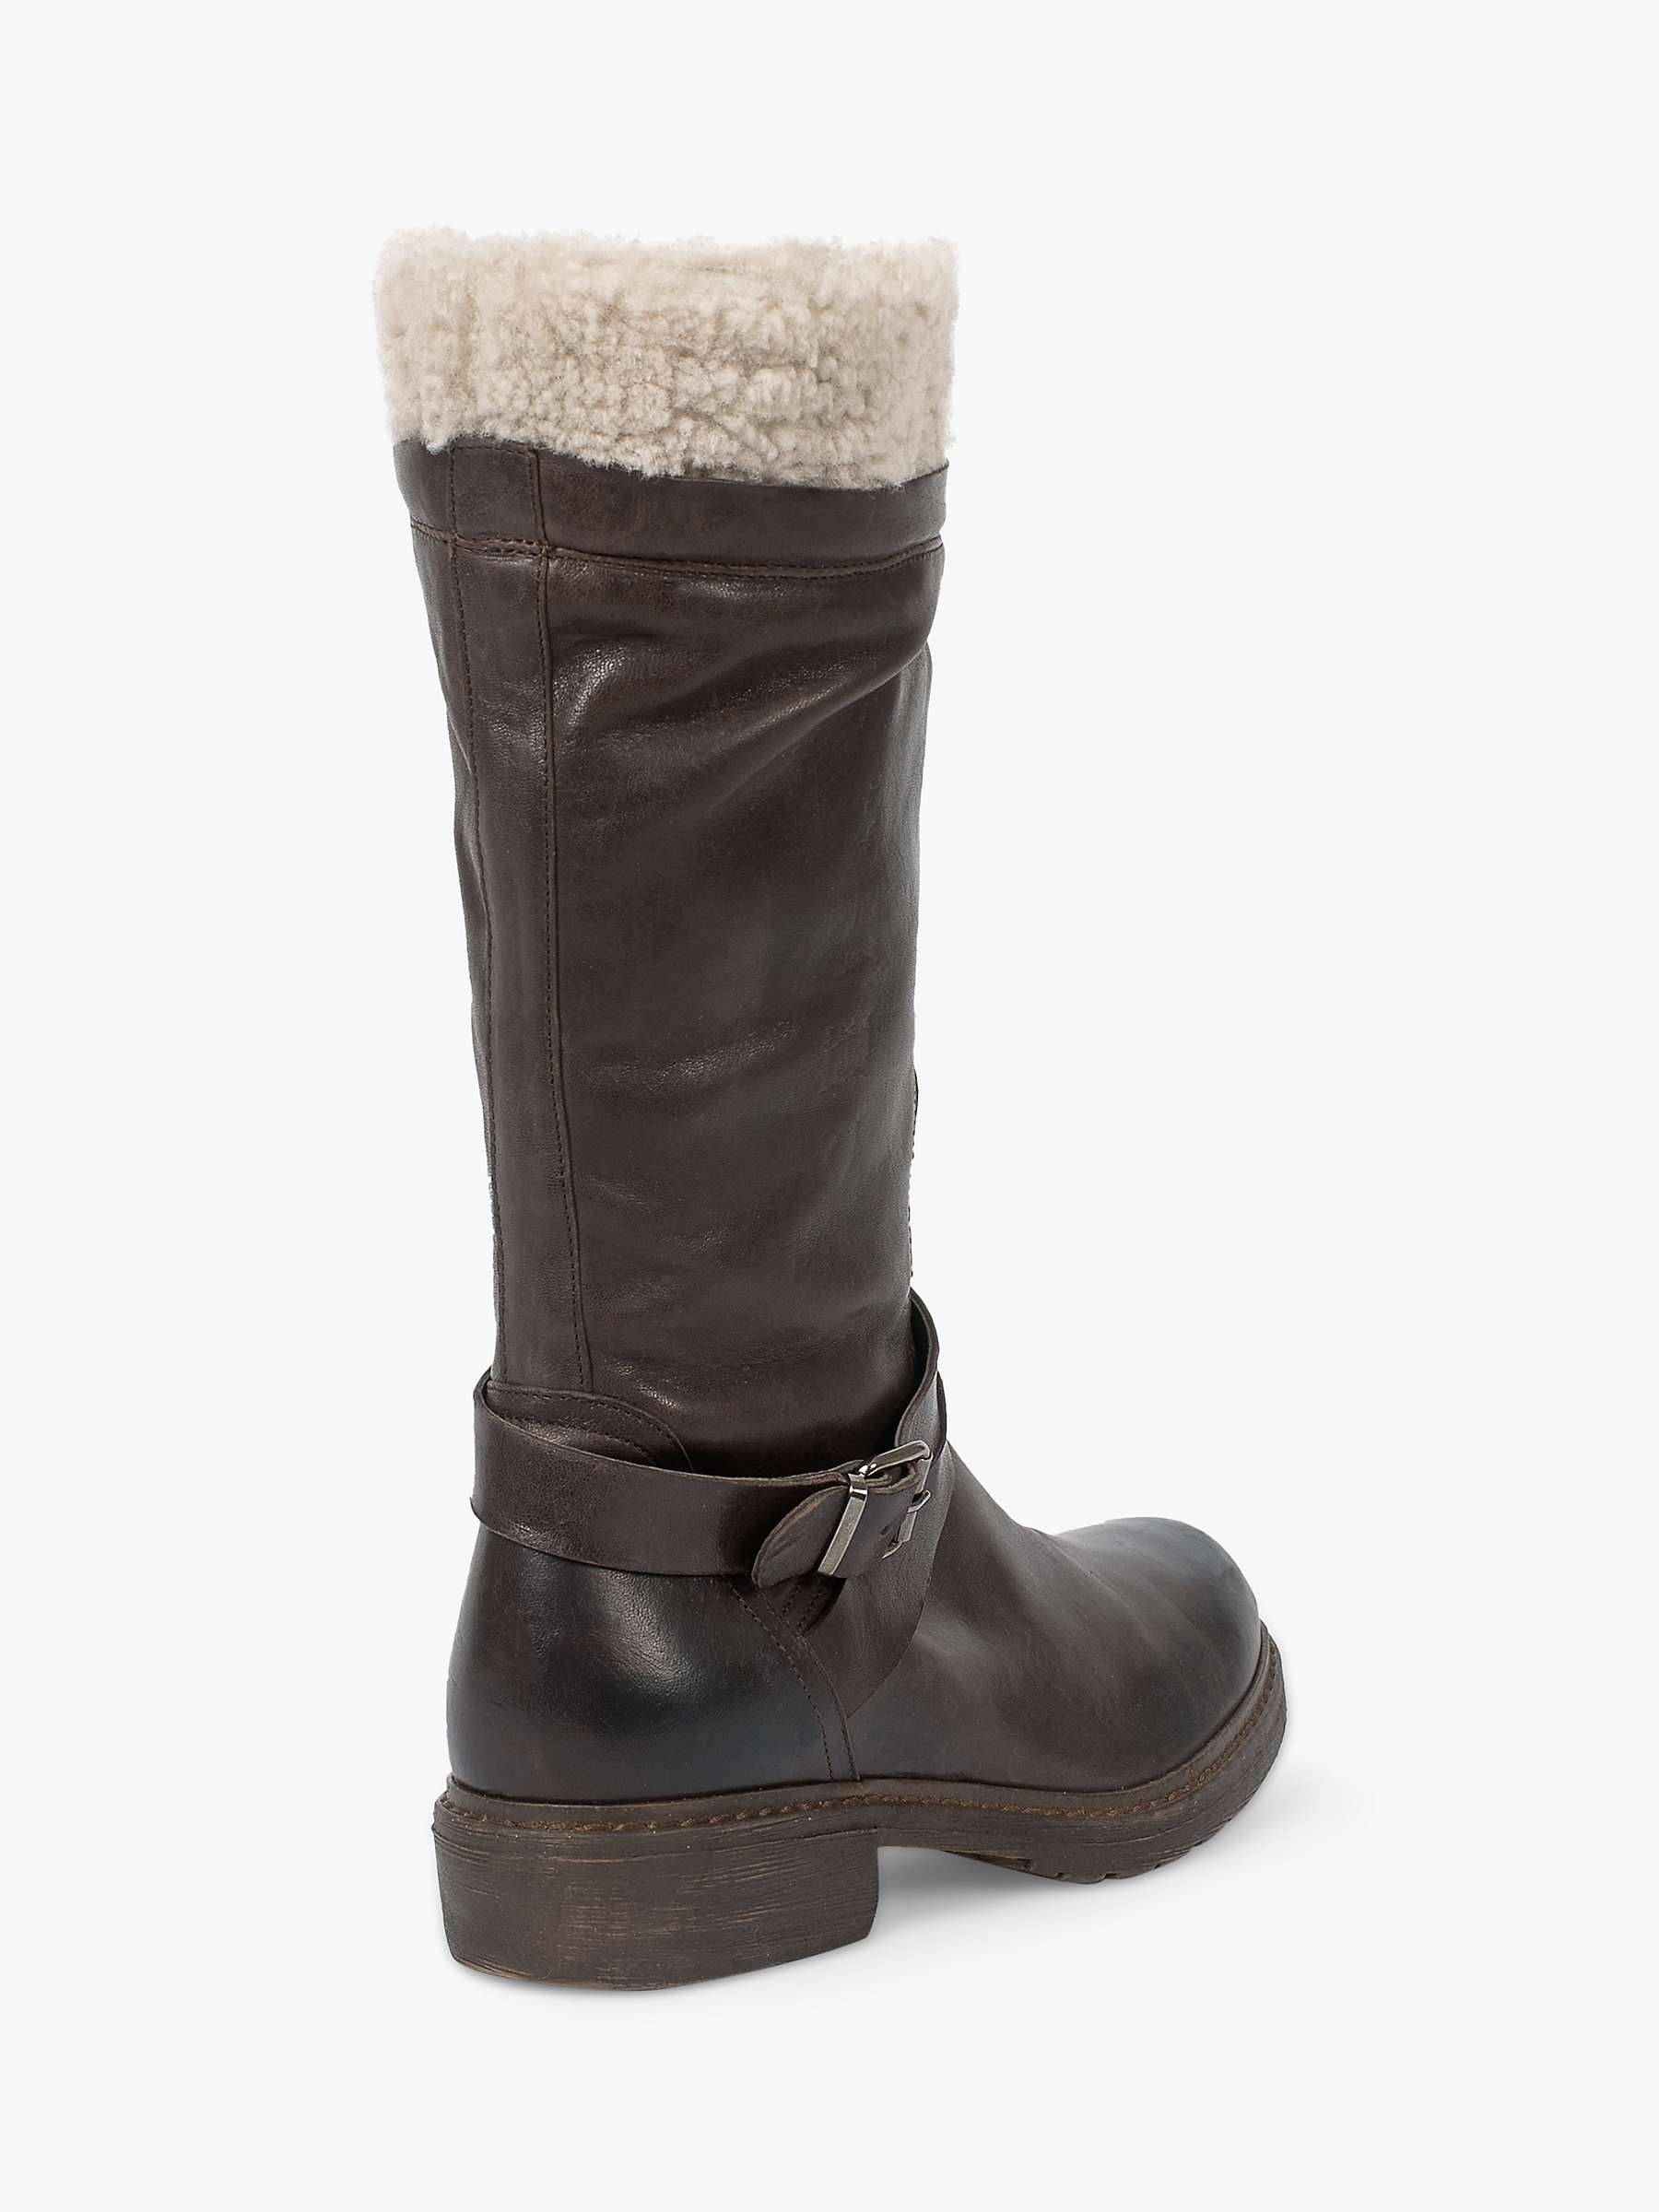 Buy Celtic & Co. Sheepskin Trim Cuff Long Boots, Tanners Brown Online at johnlewis.com